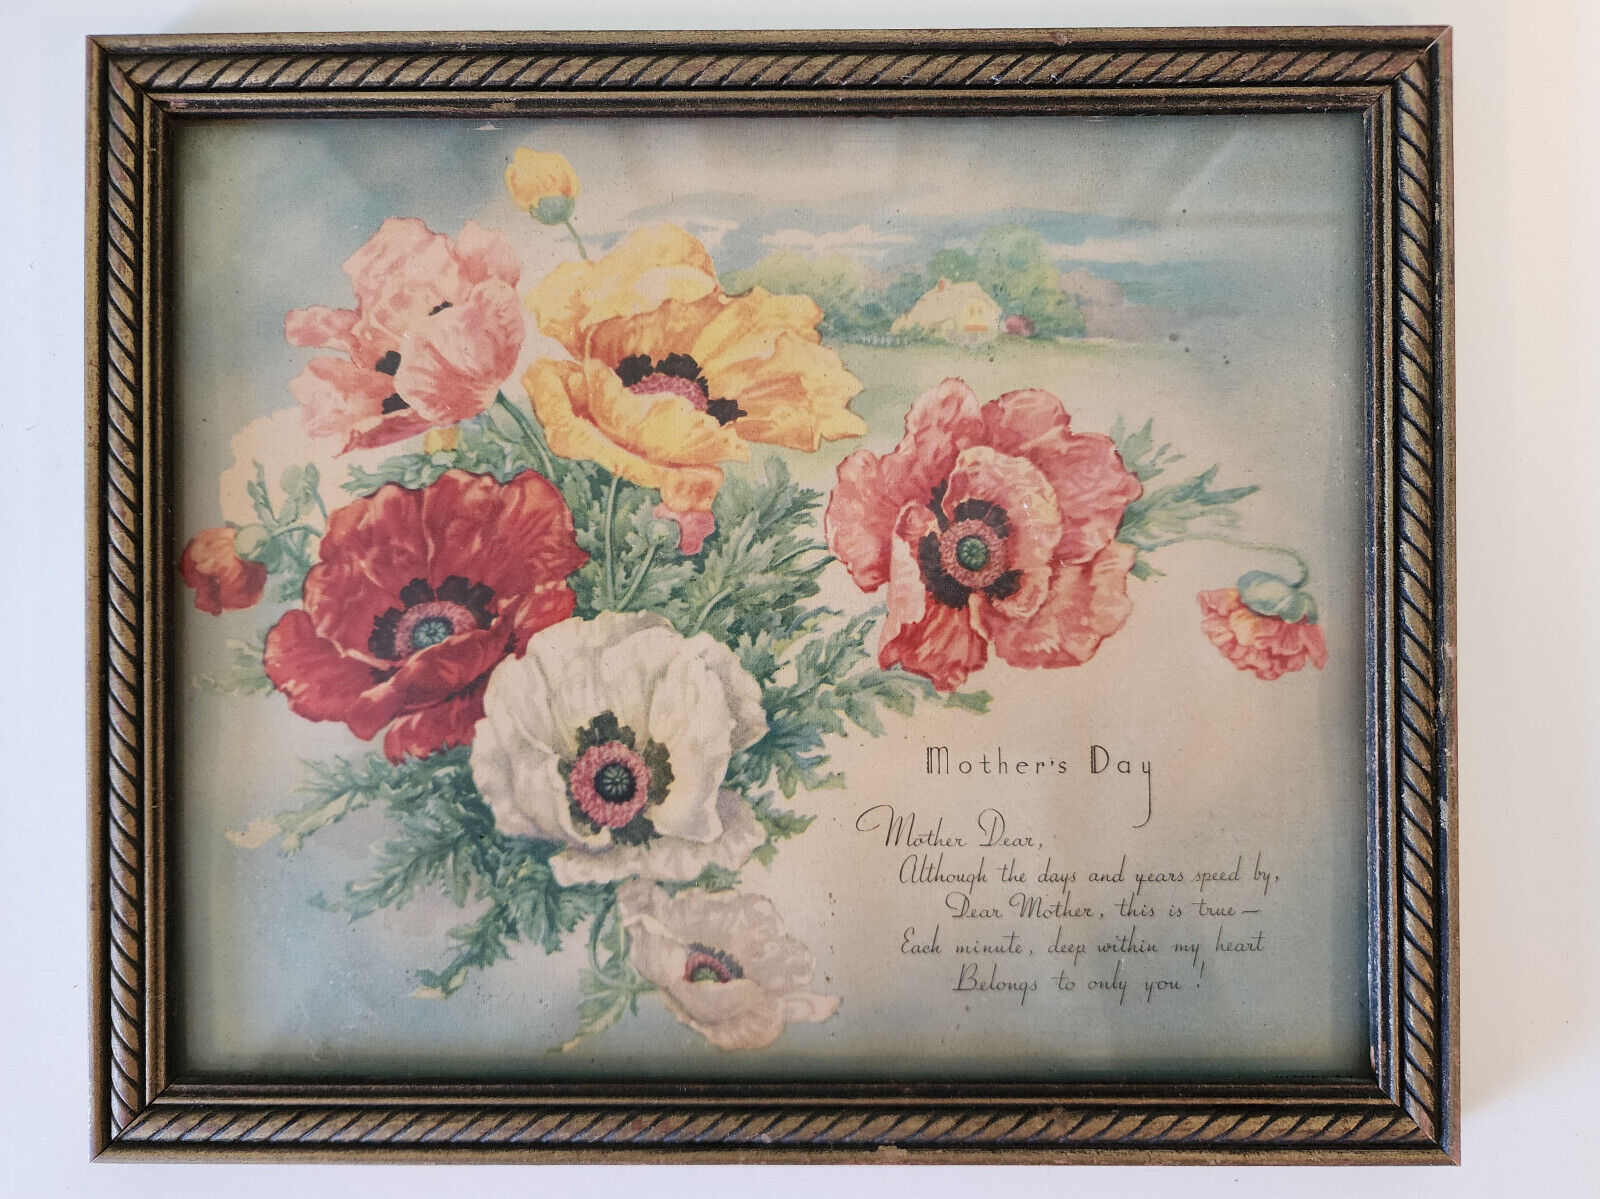 Vintage framed Mother\'s Day picture of poppies, a cottage, and poem